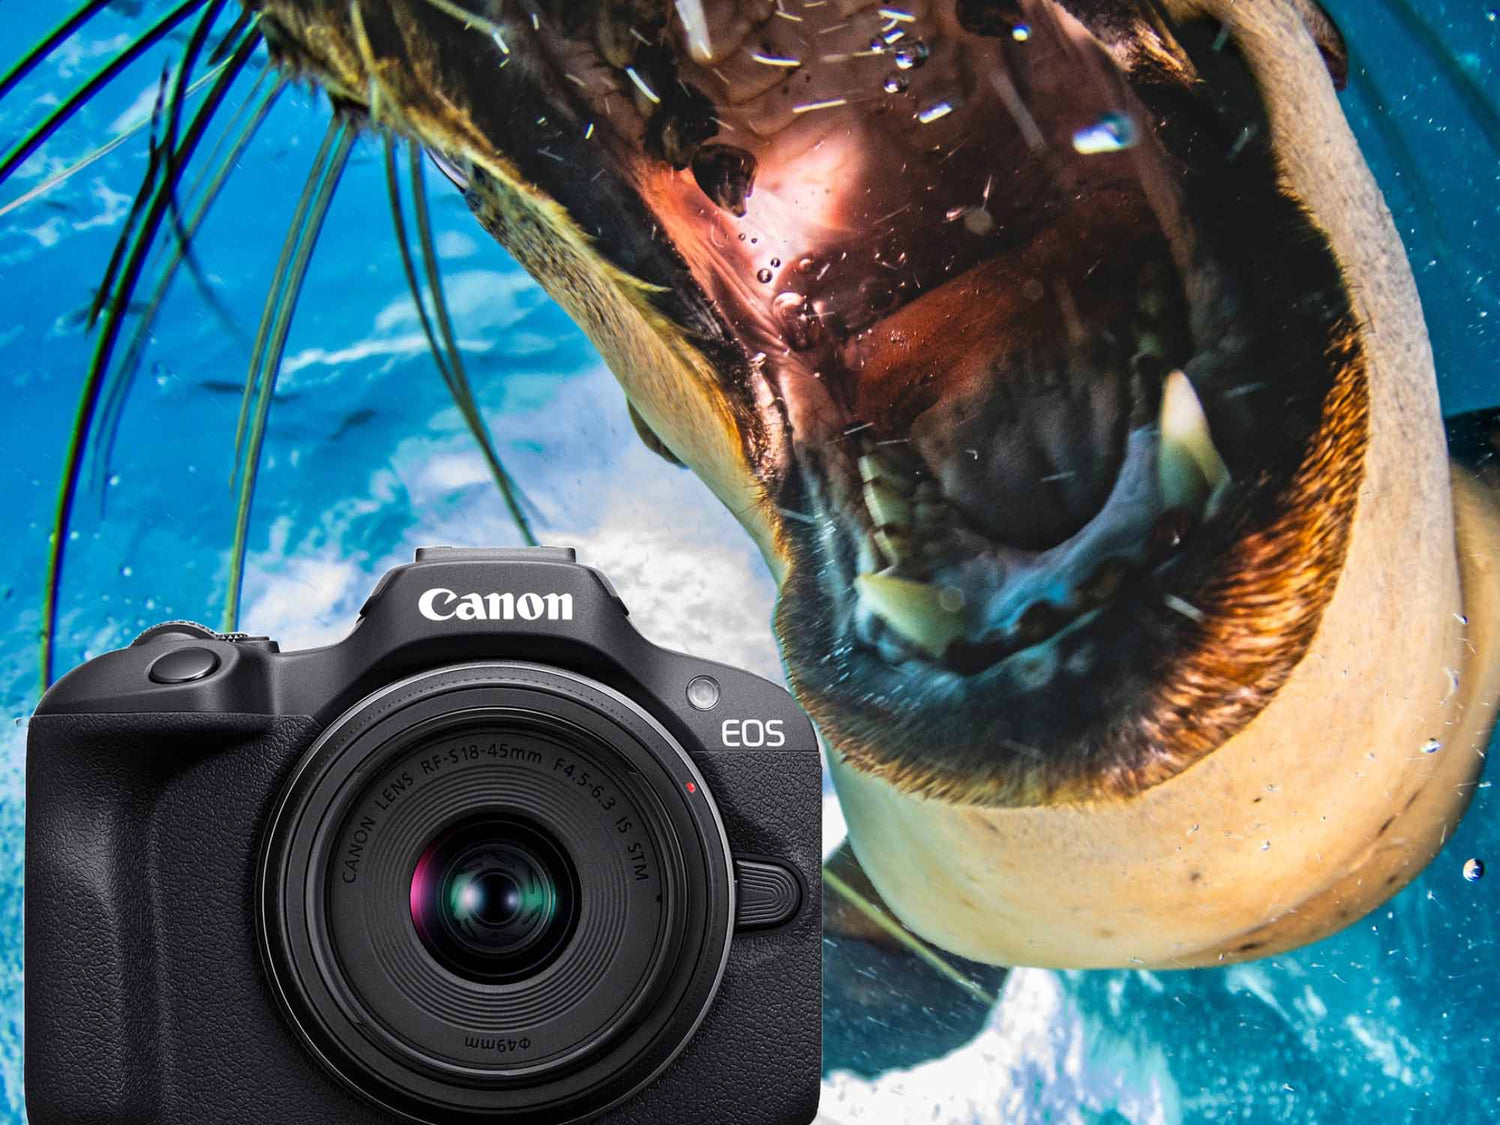 Canon R7 Underwater Review - Bluewater Photo